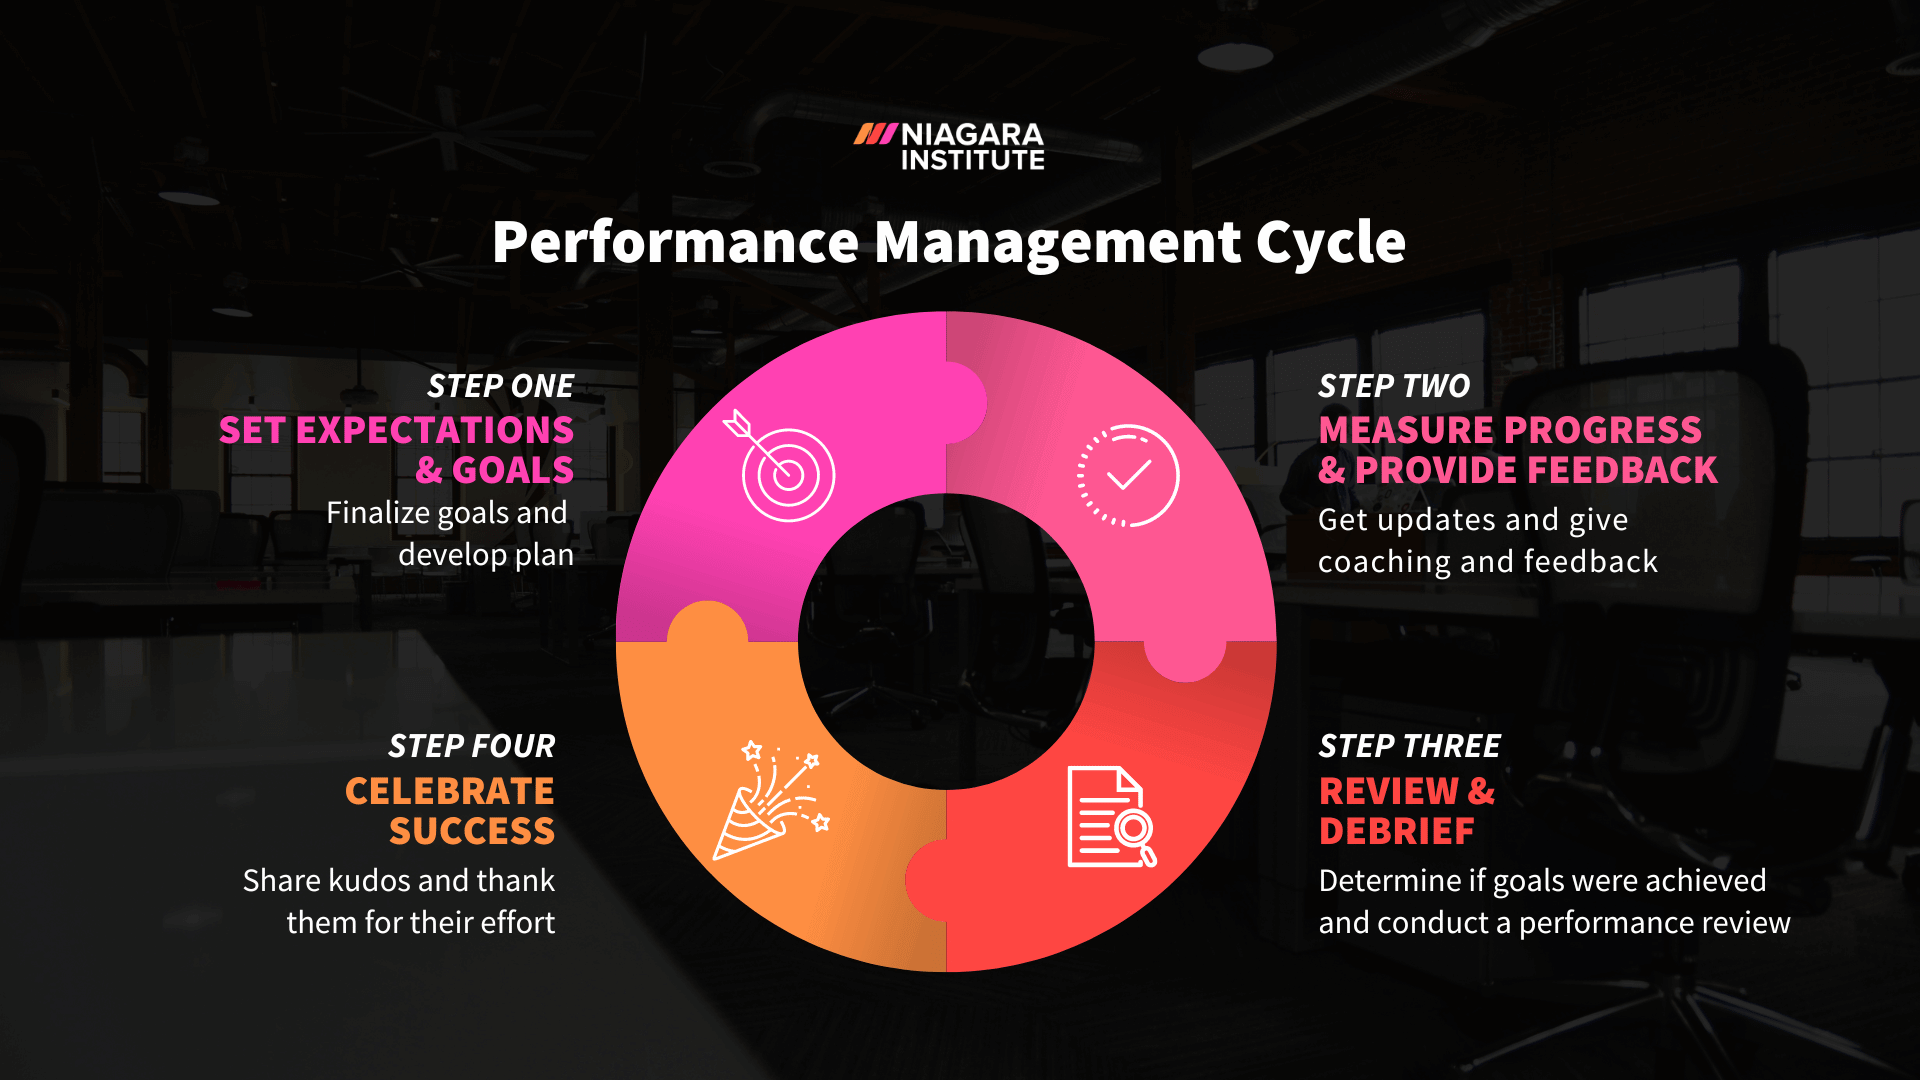 Performance Management Cycle  - Niagara Institute (1)